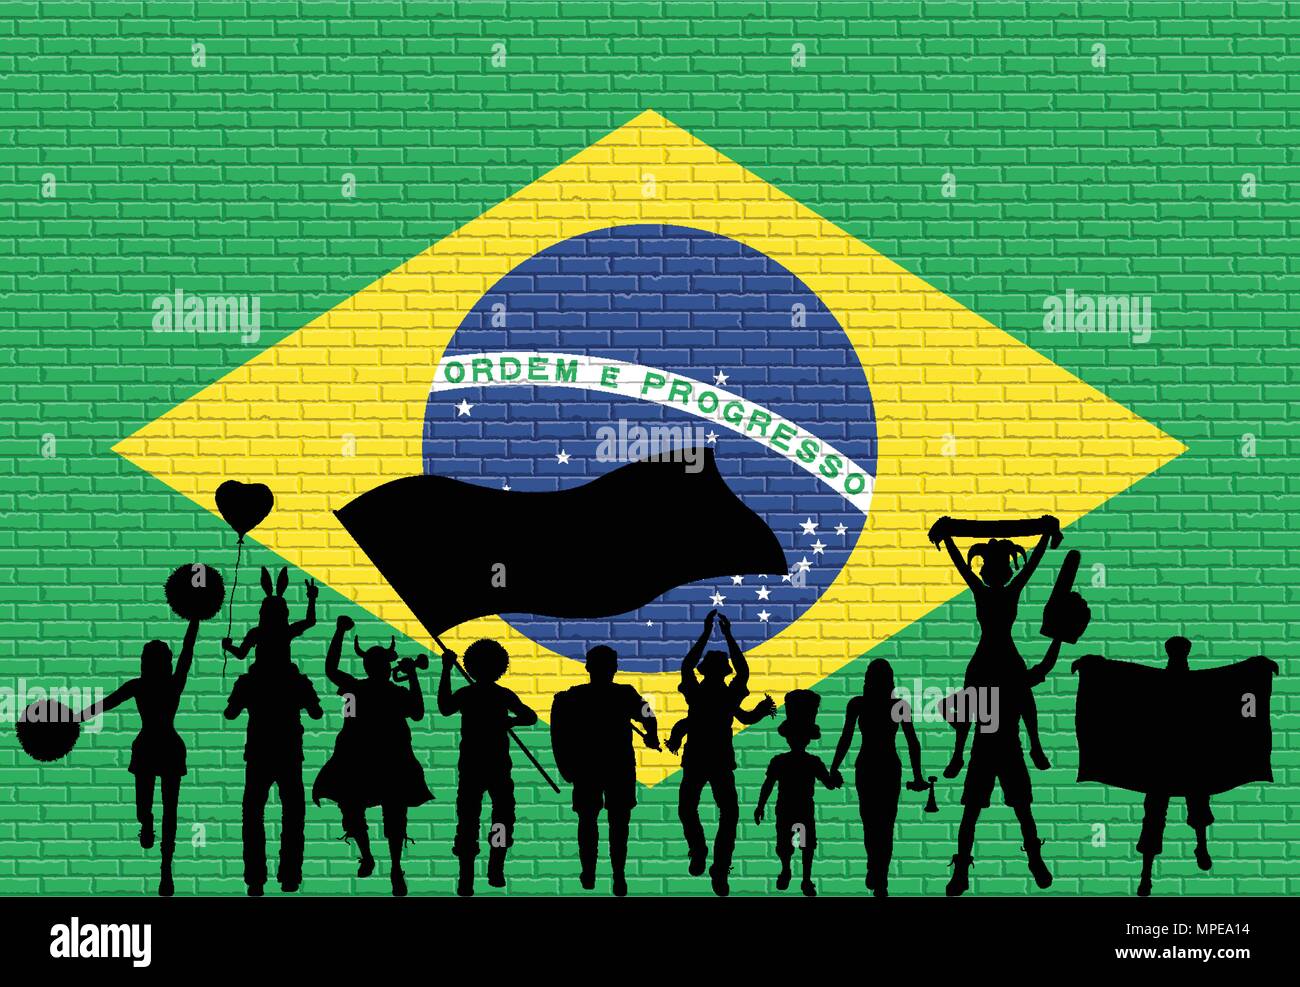 Brazilian Supporter Silhouette In Front Of Brick Wall With Brazil Flag All The Objects